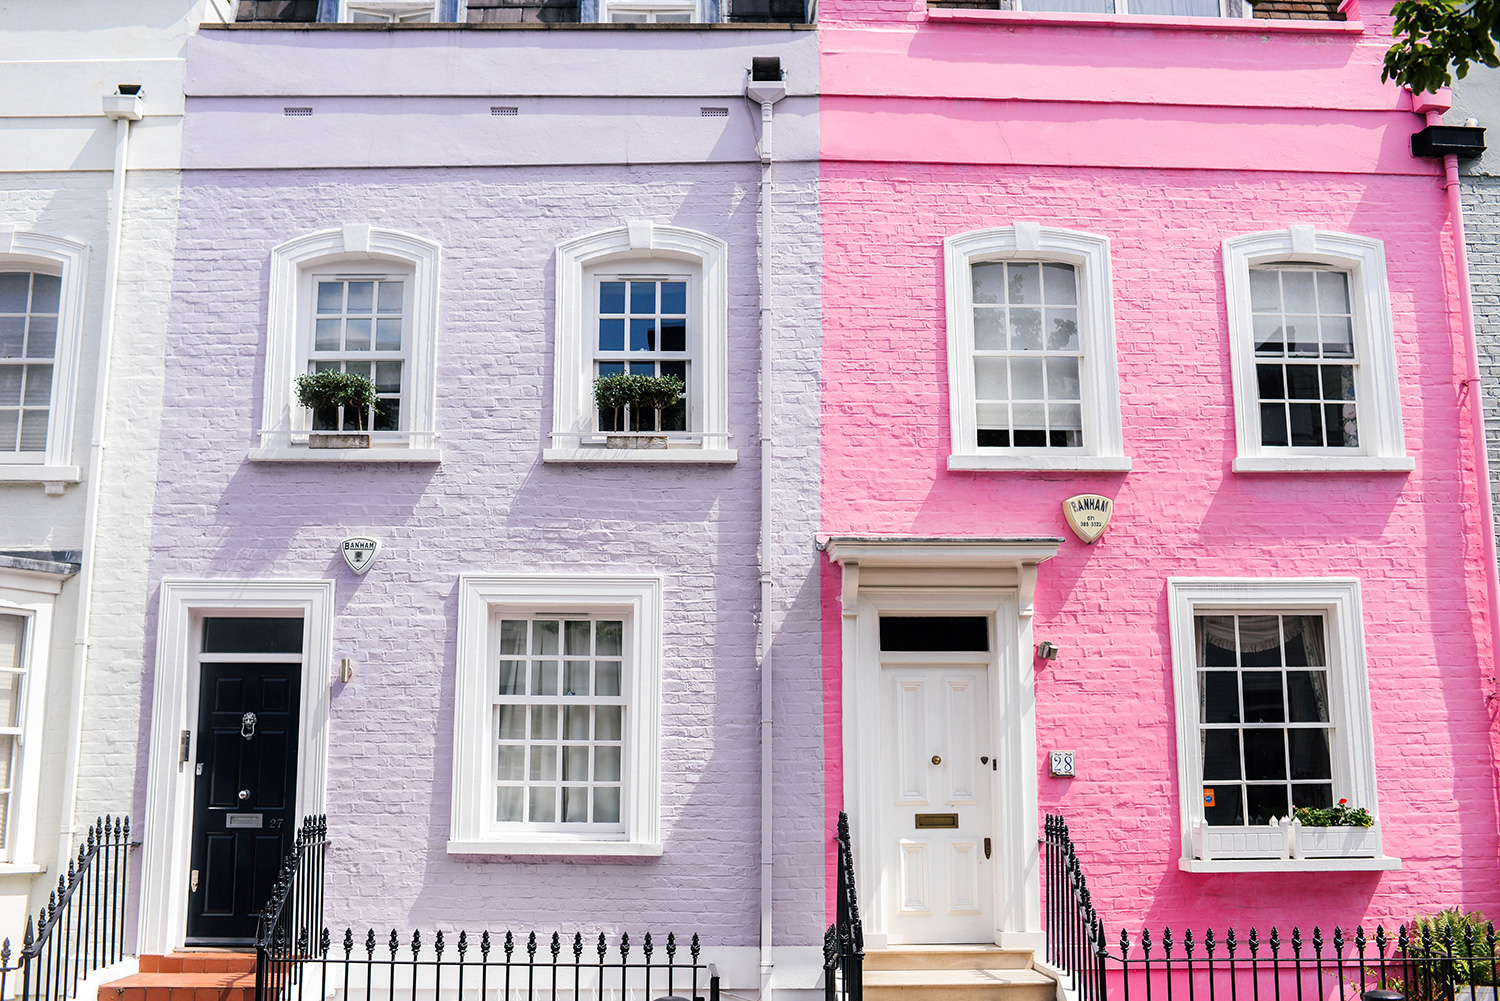 Most Colorful Street in London: Bywater Street in Chelsea